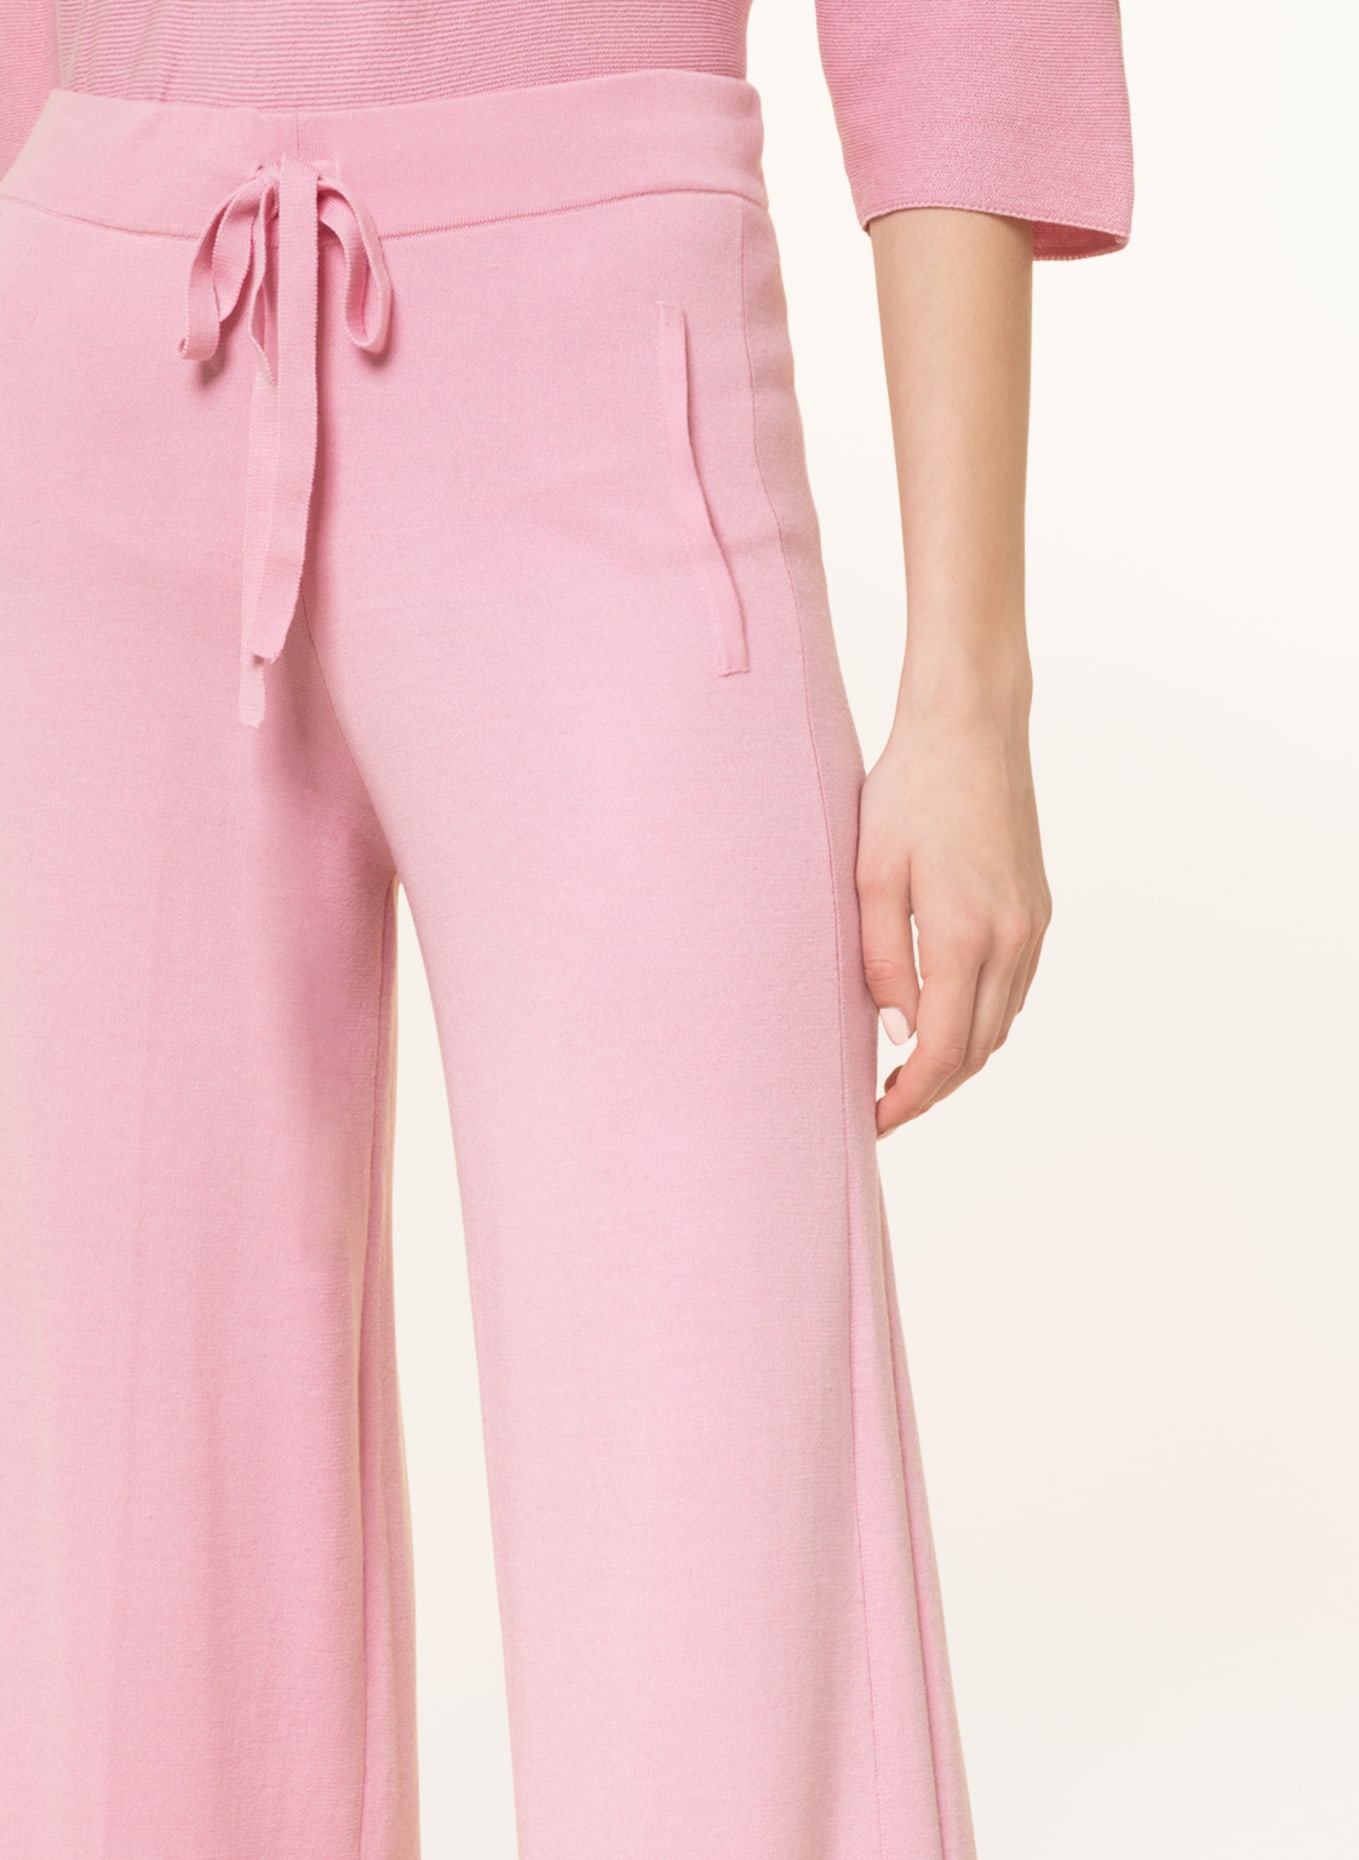 HEMISPHERE Pants in jogger style, Color: PINK (Image 5)